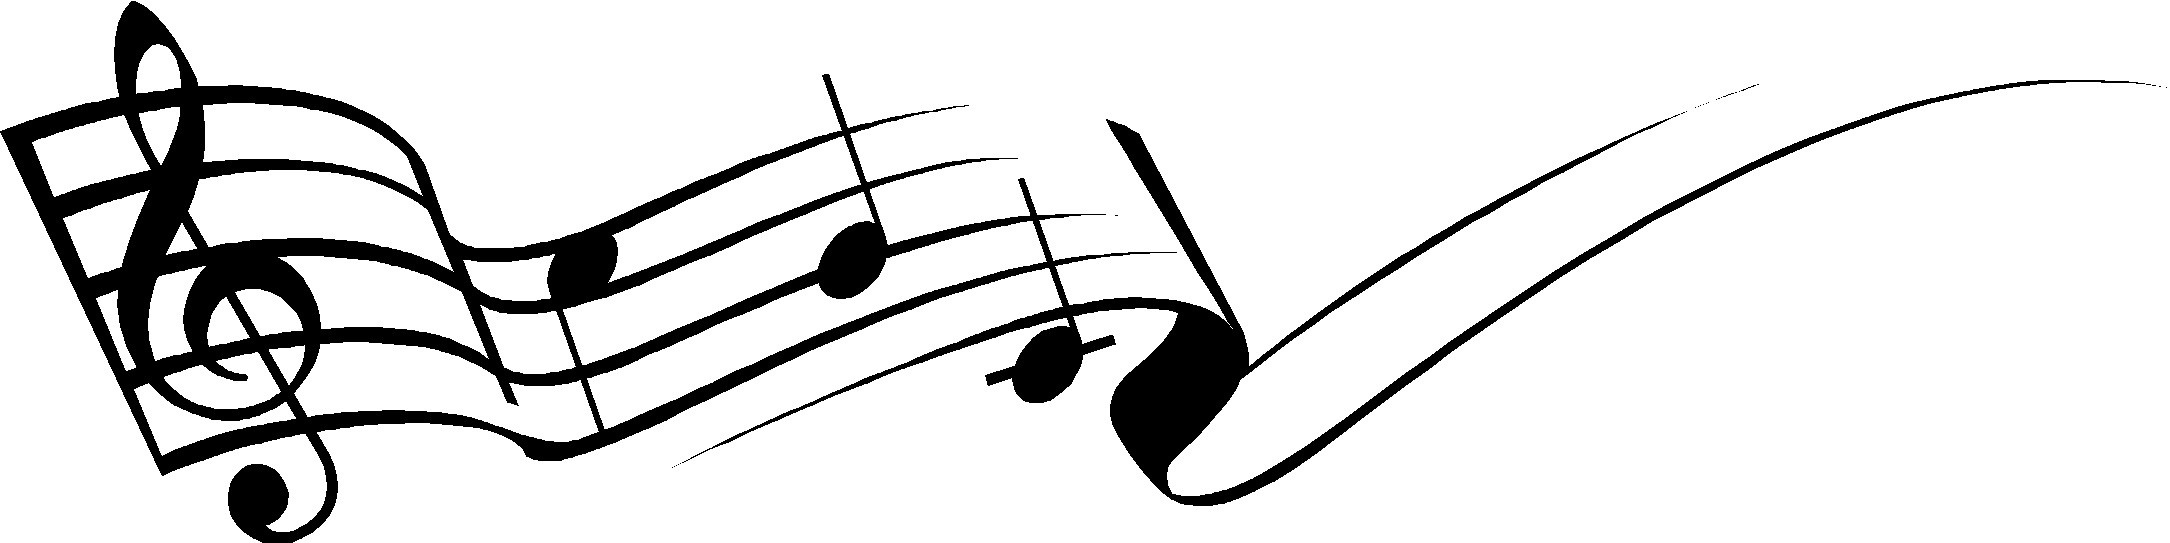 Music Notes Transparent | Clipart library - Free Clipart Images